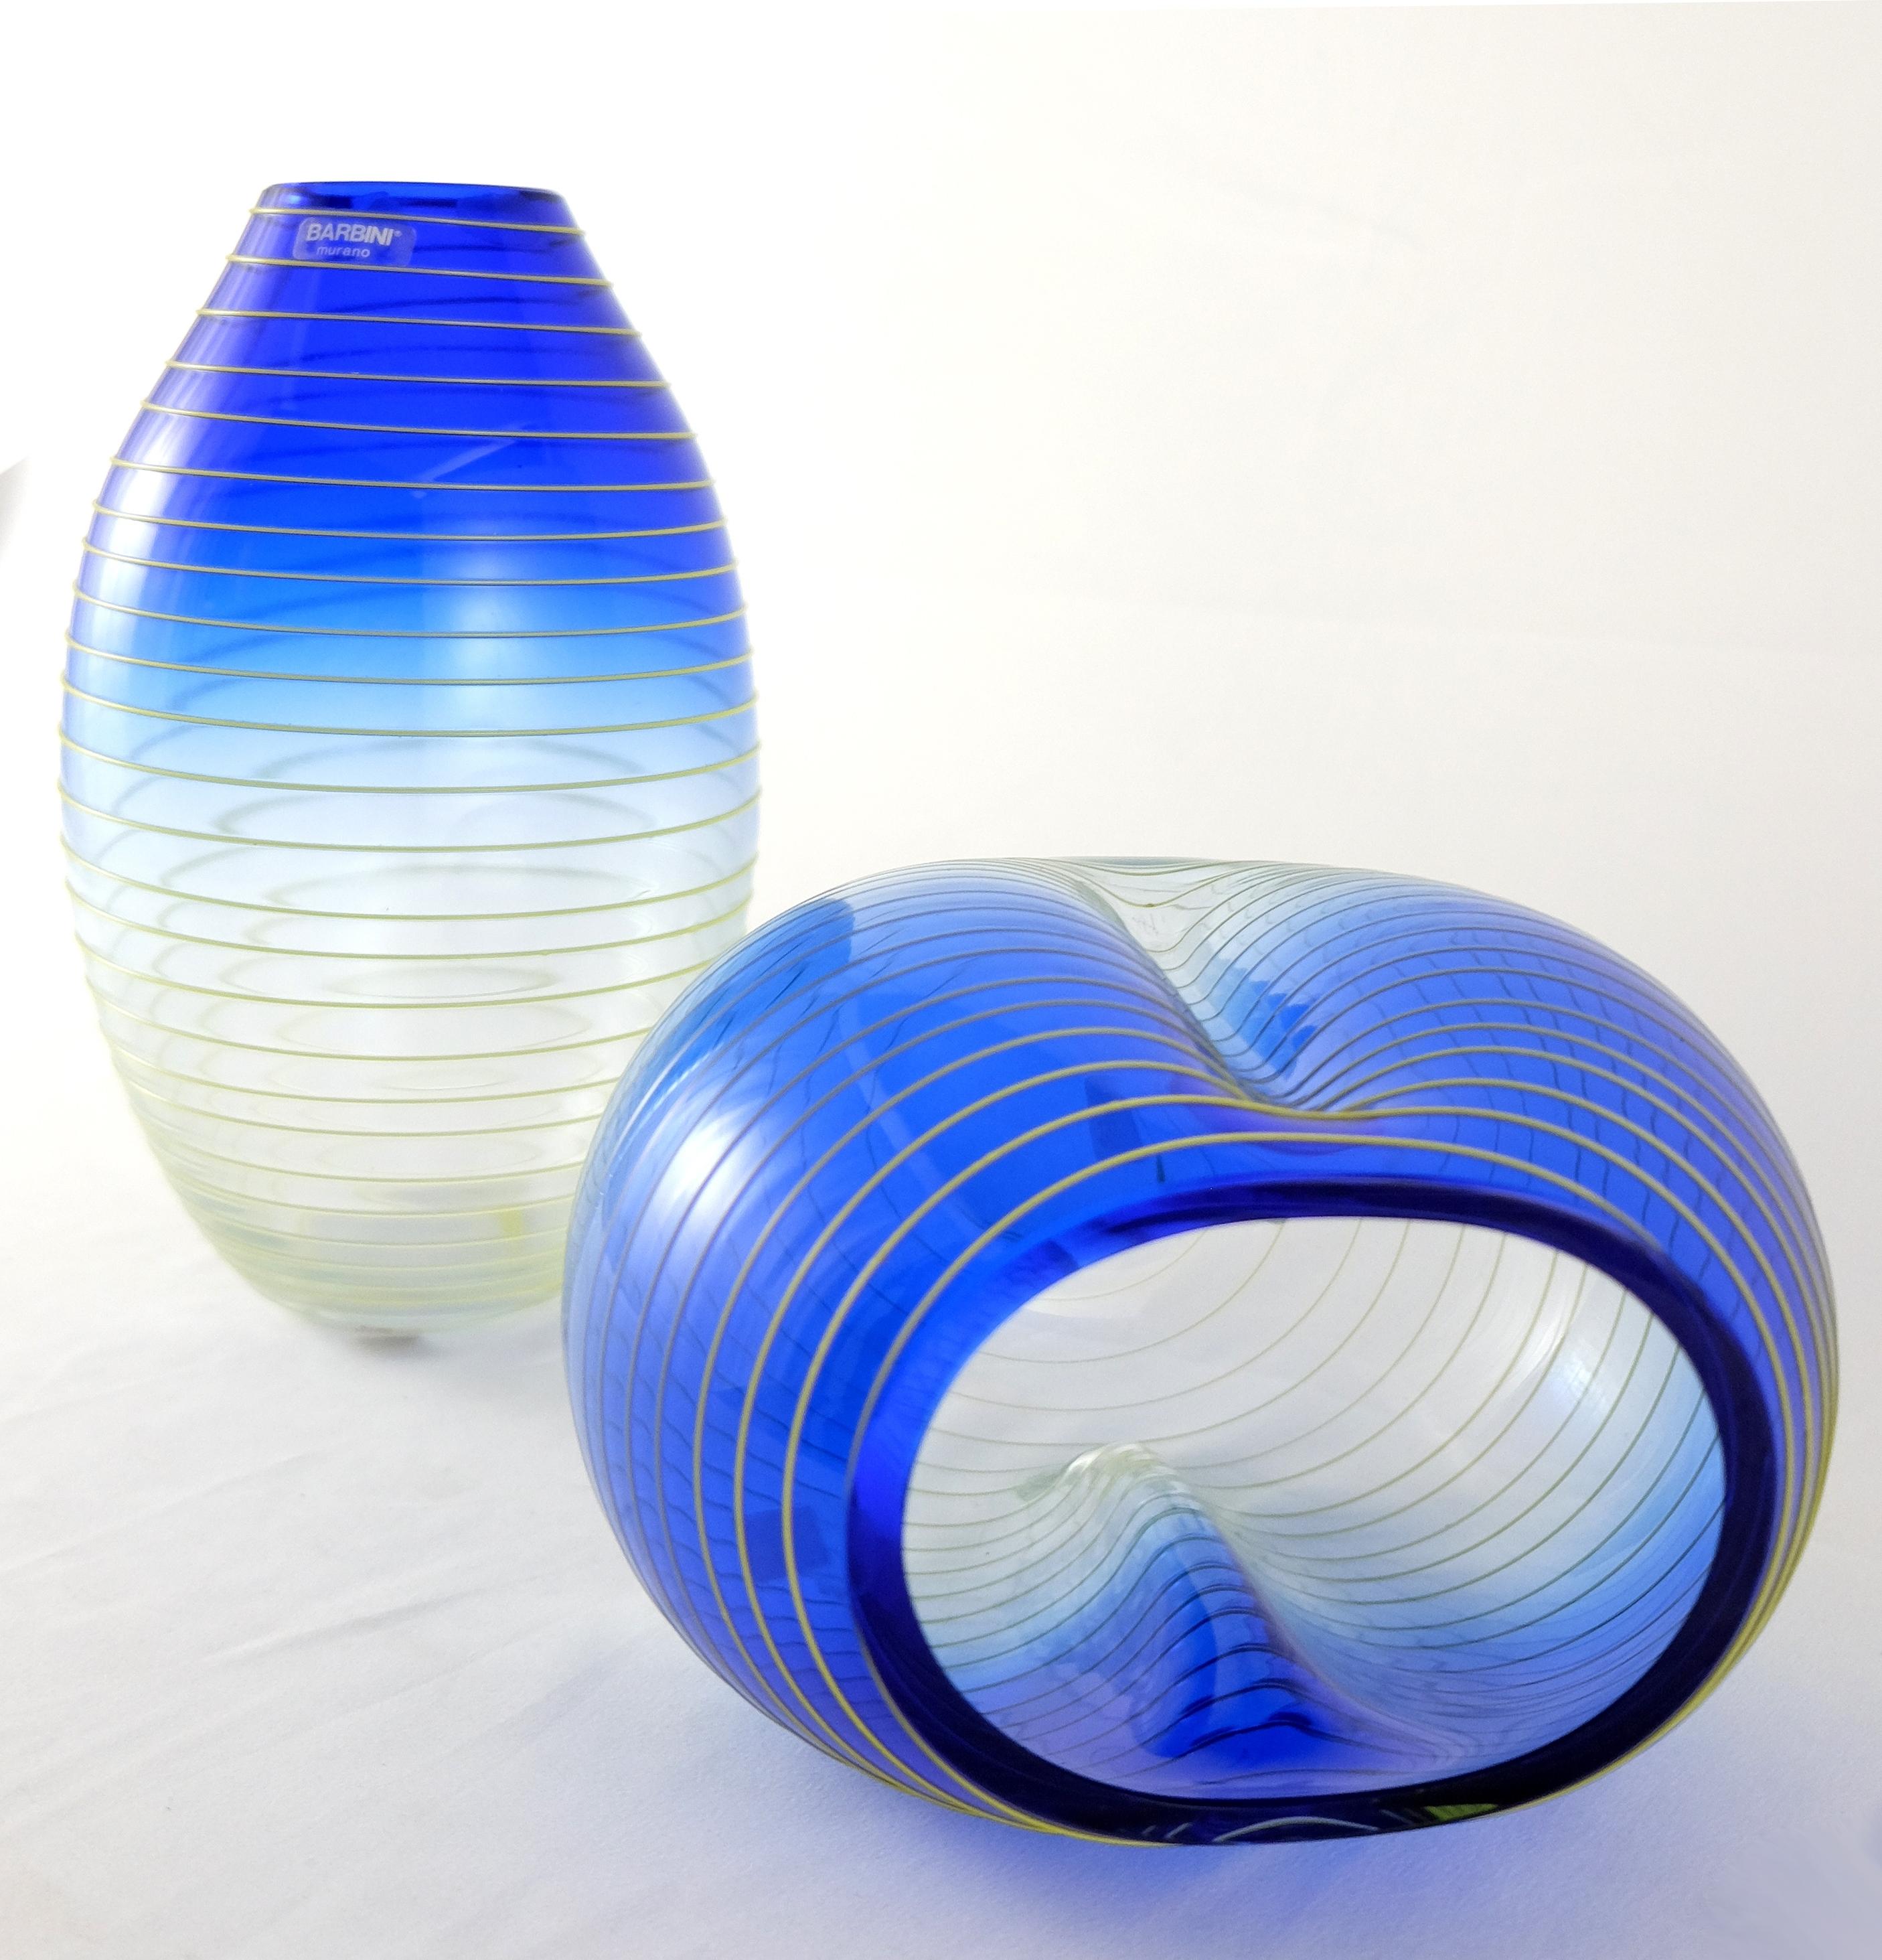 Barbini Murano yellow and blue stripe glass vase set from Italy. Offered for sale is a set of two yellow and blue stripe Murano glass vases. Each vase is signed on the base and still retains the original Barbini label. The measurements given below